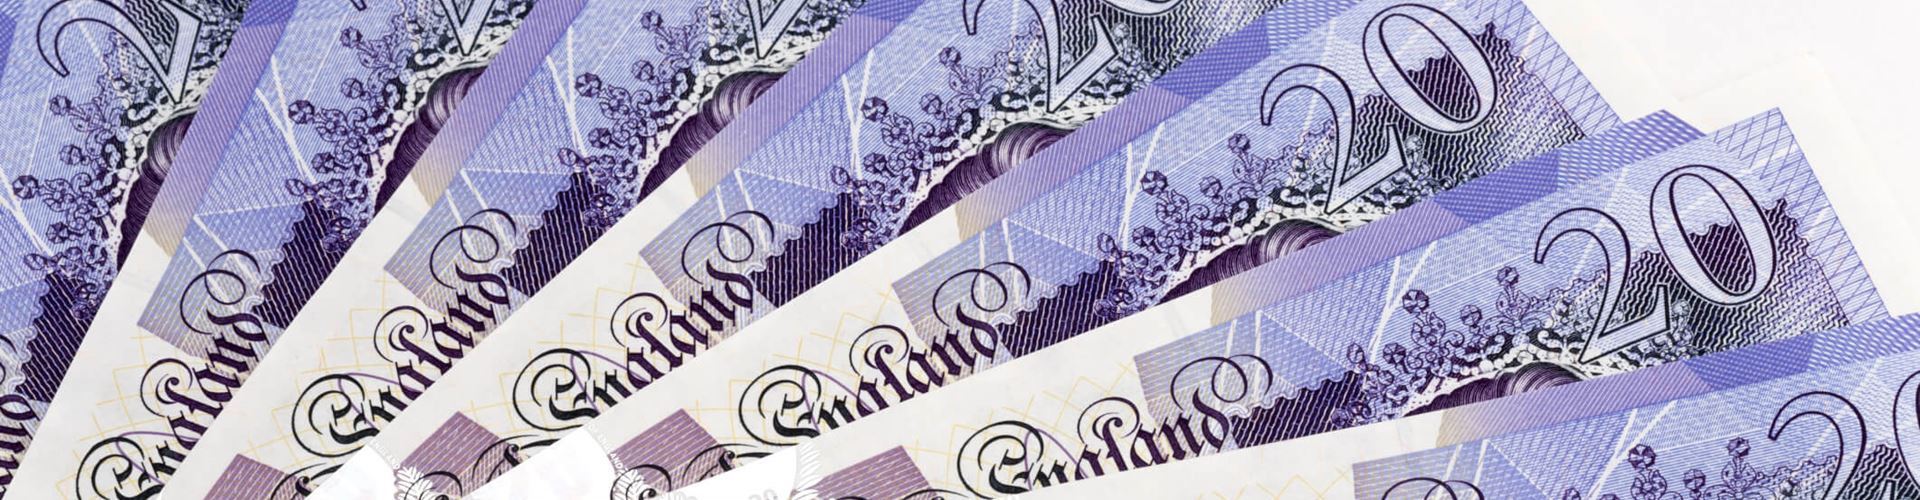 Insolvents owed money to 113,000 UK businesses in 2015, shows research